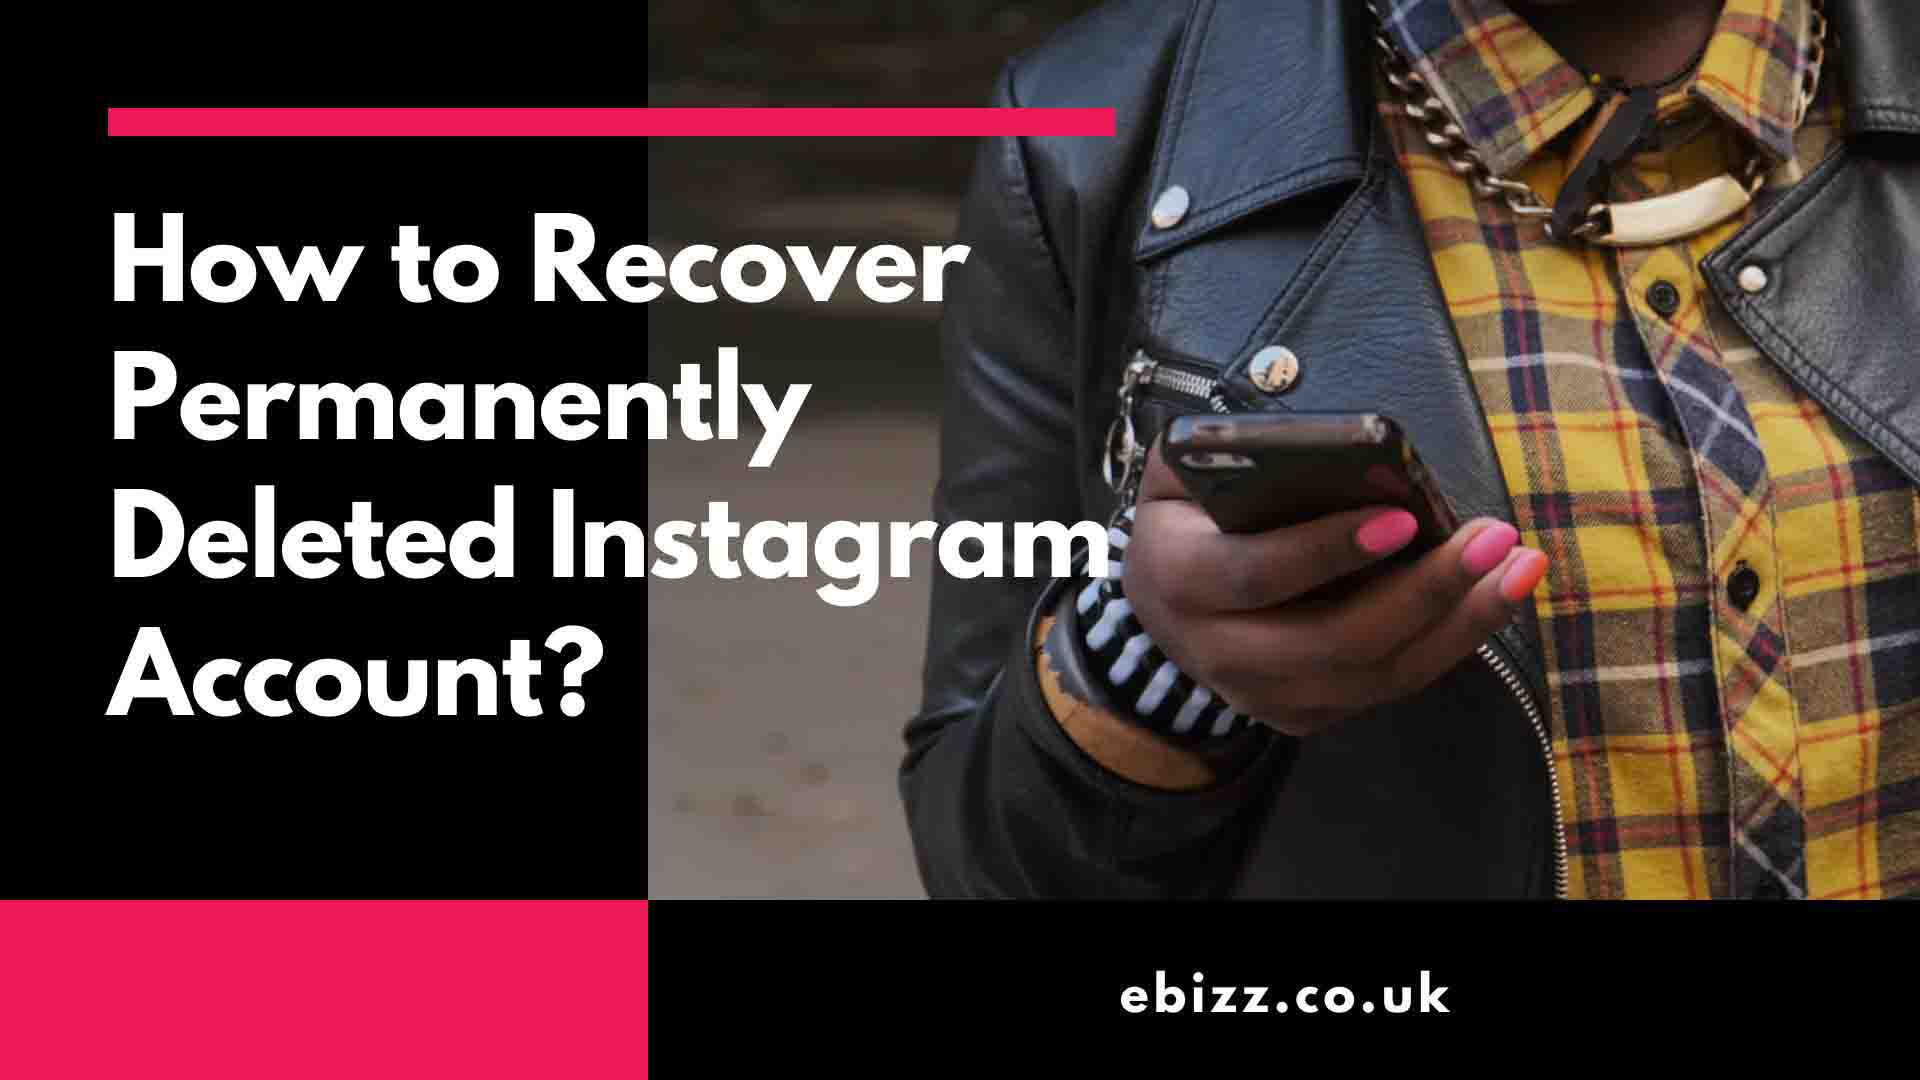 How to Recover Permanently Deleted Instagram Account?